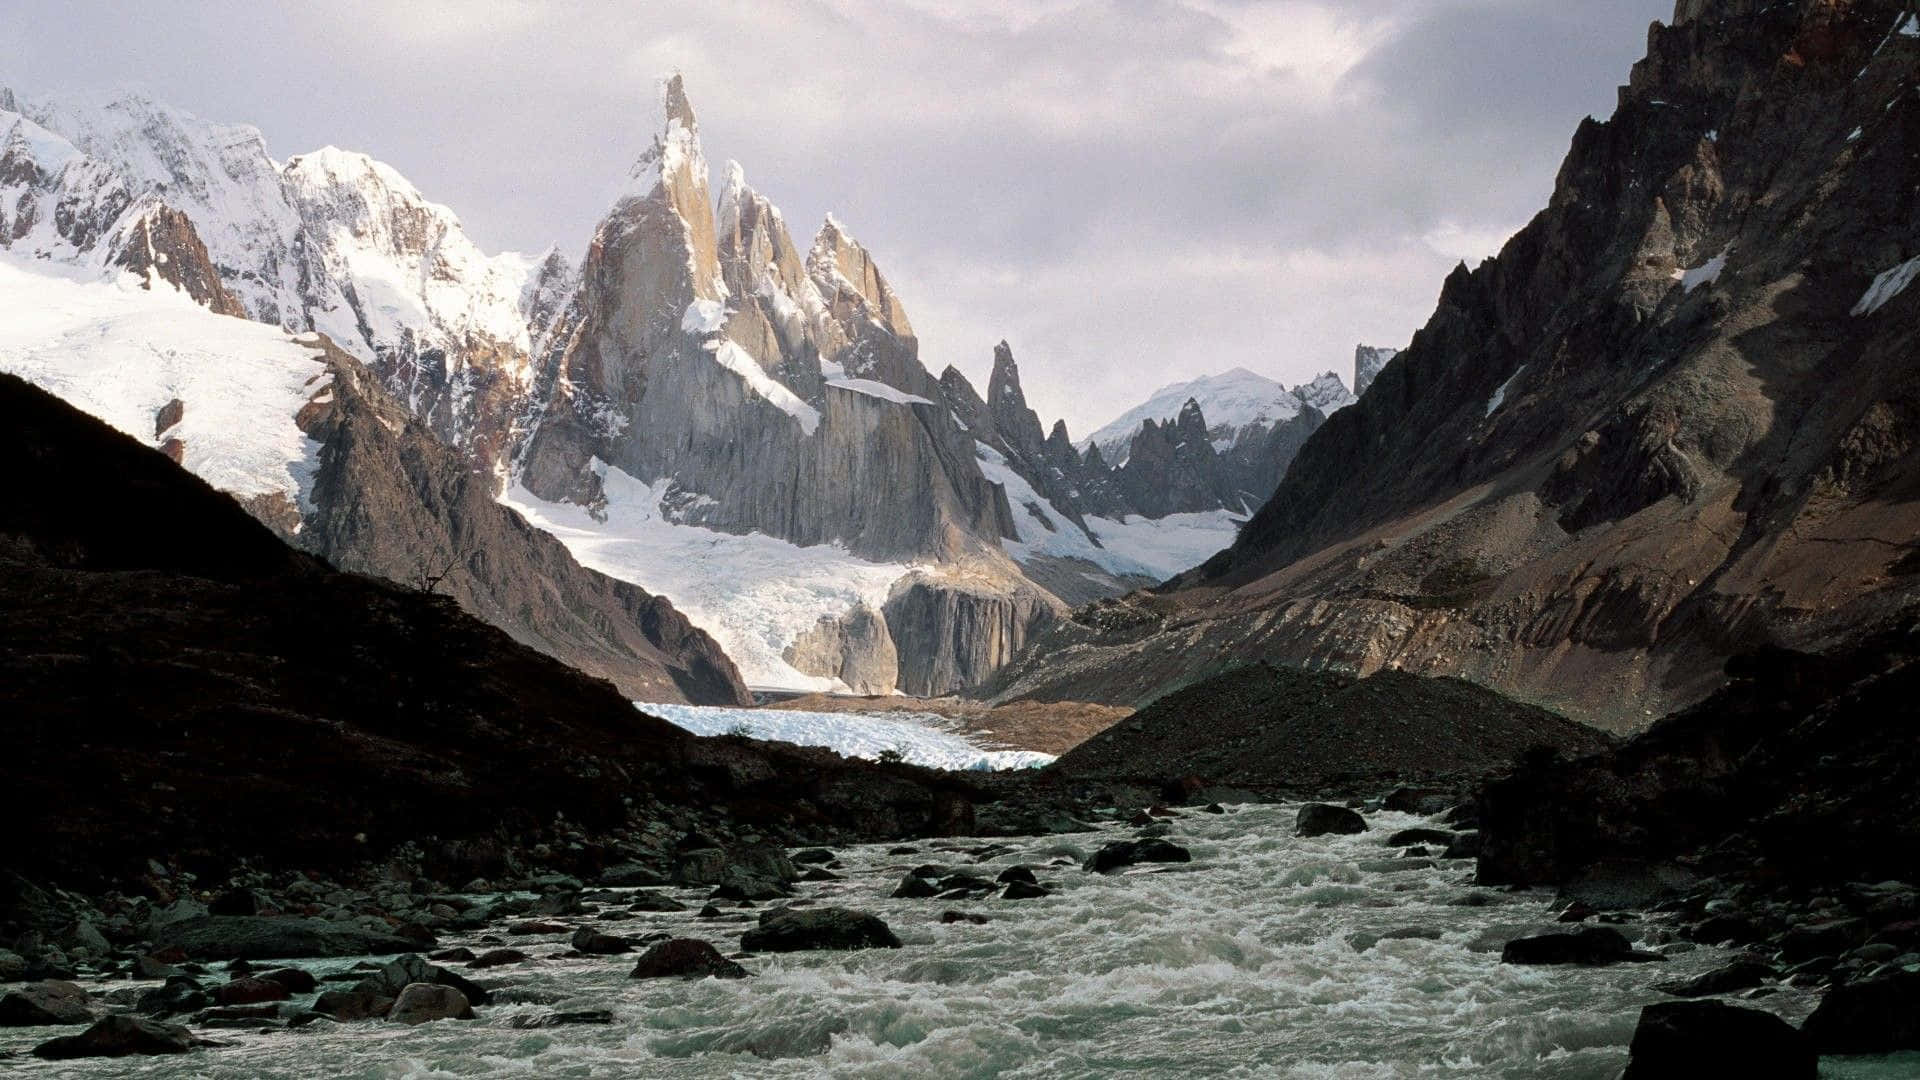 "Discover the magic of Patagonia"